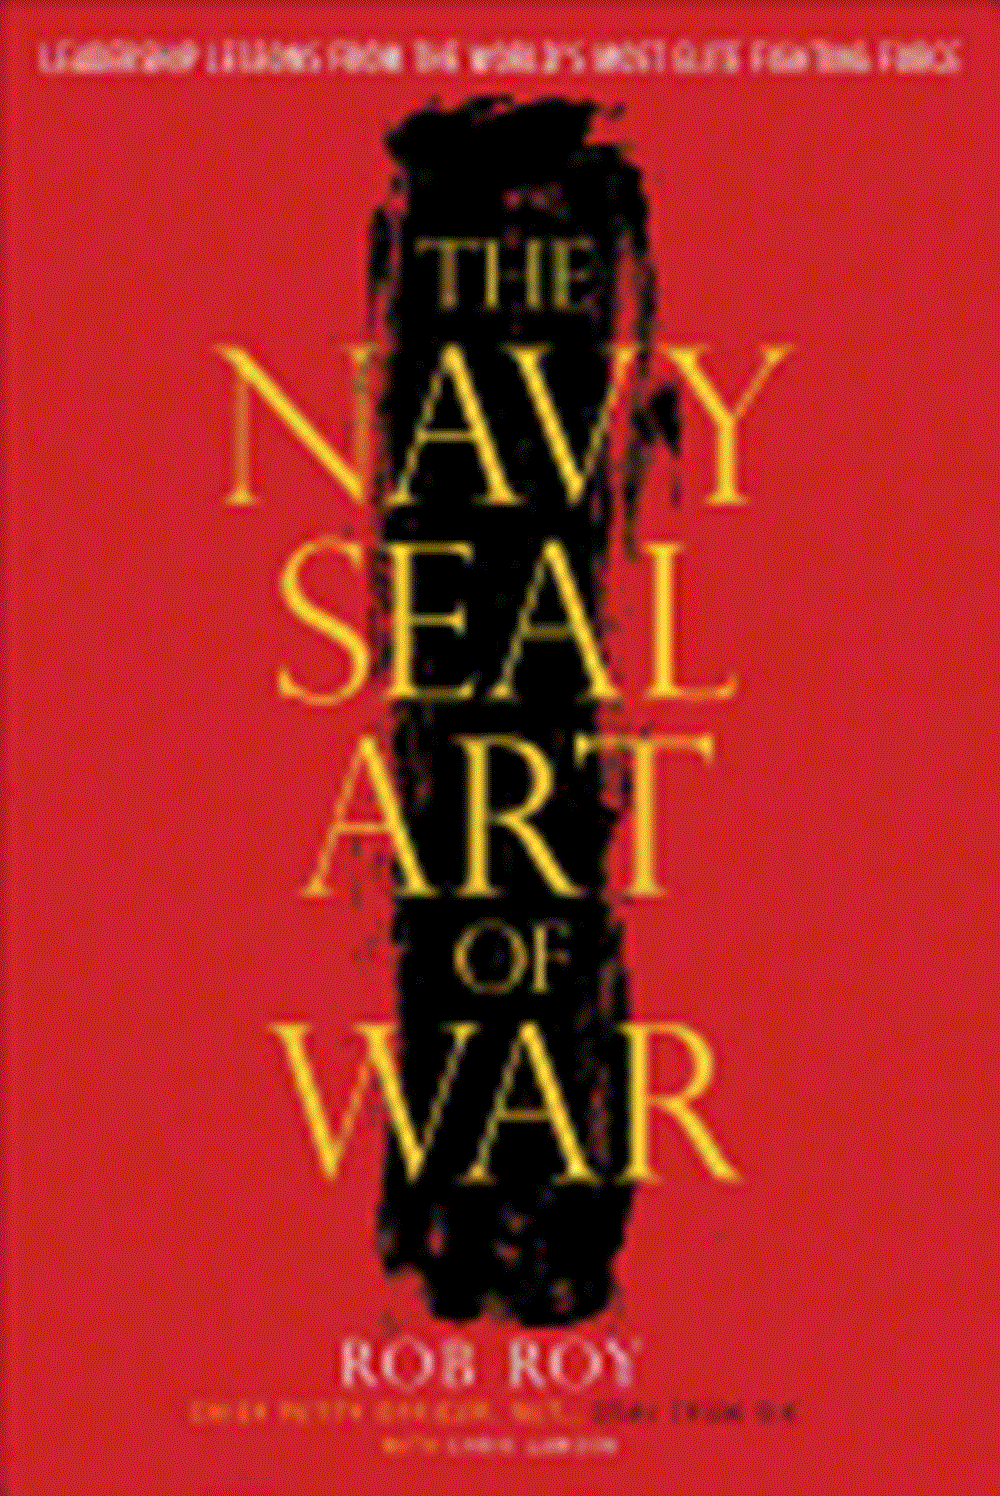 Navy Seal Art of War Leadership Lessons from the World's Most Elite Fighting Force